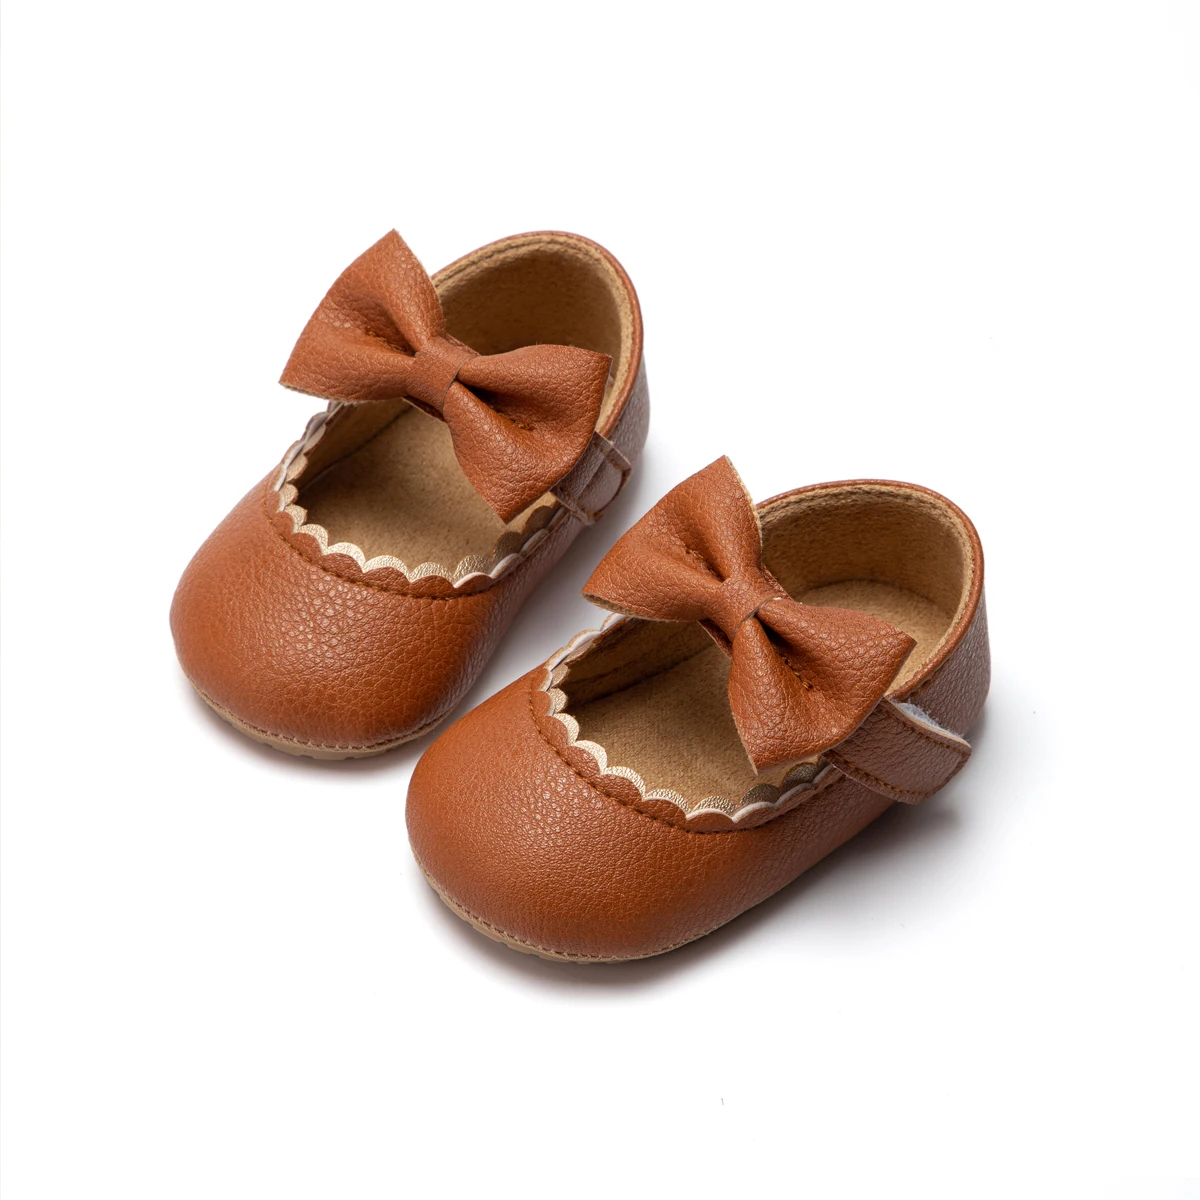 Baby Casual Shoes Infant Toddler Bowknot Non-slip Rubber Soft-Sole Flat PU First Walker Newborn Bow Decor Mary Janes baby shoes